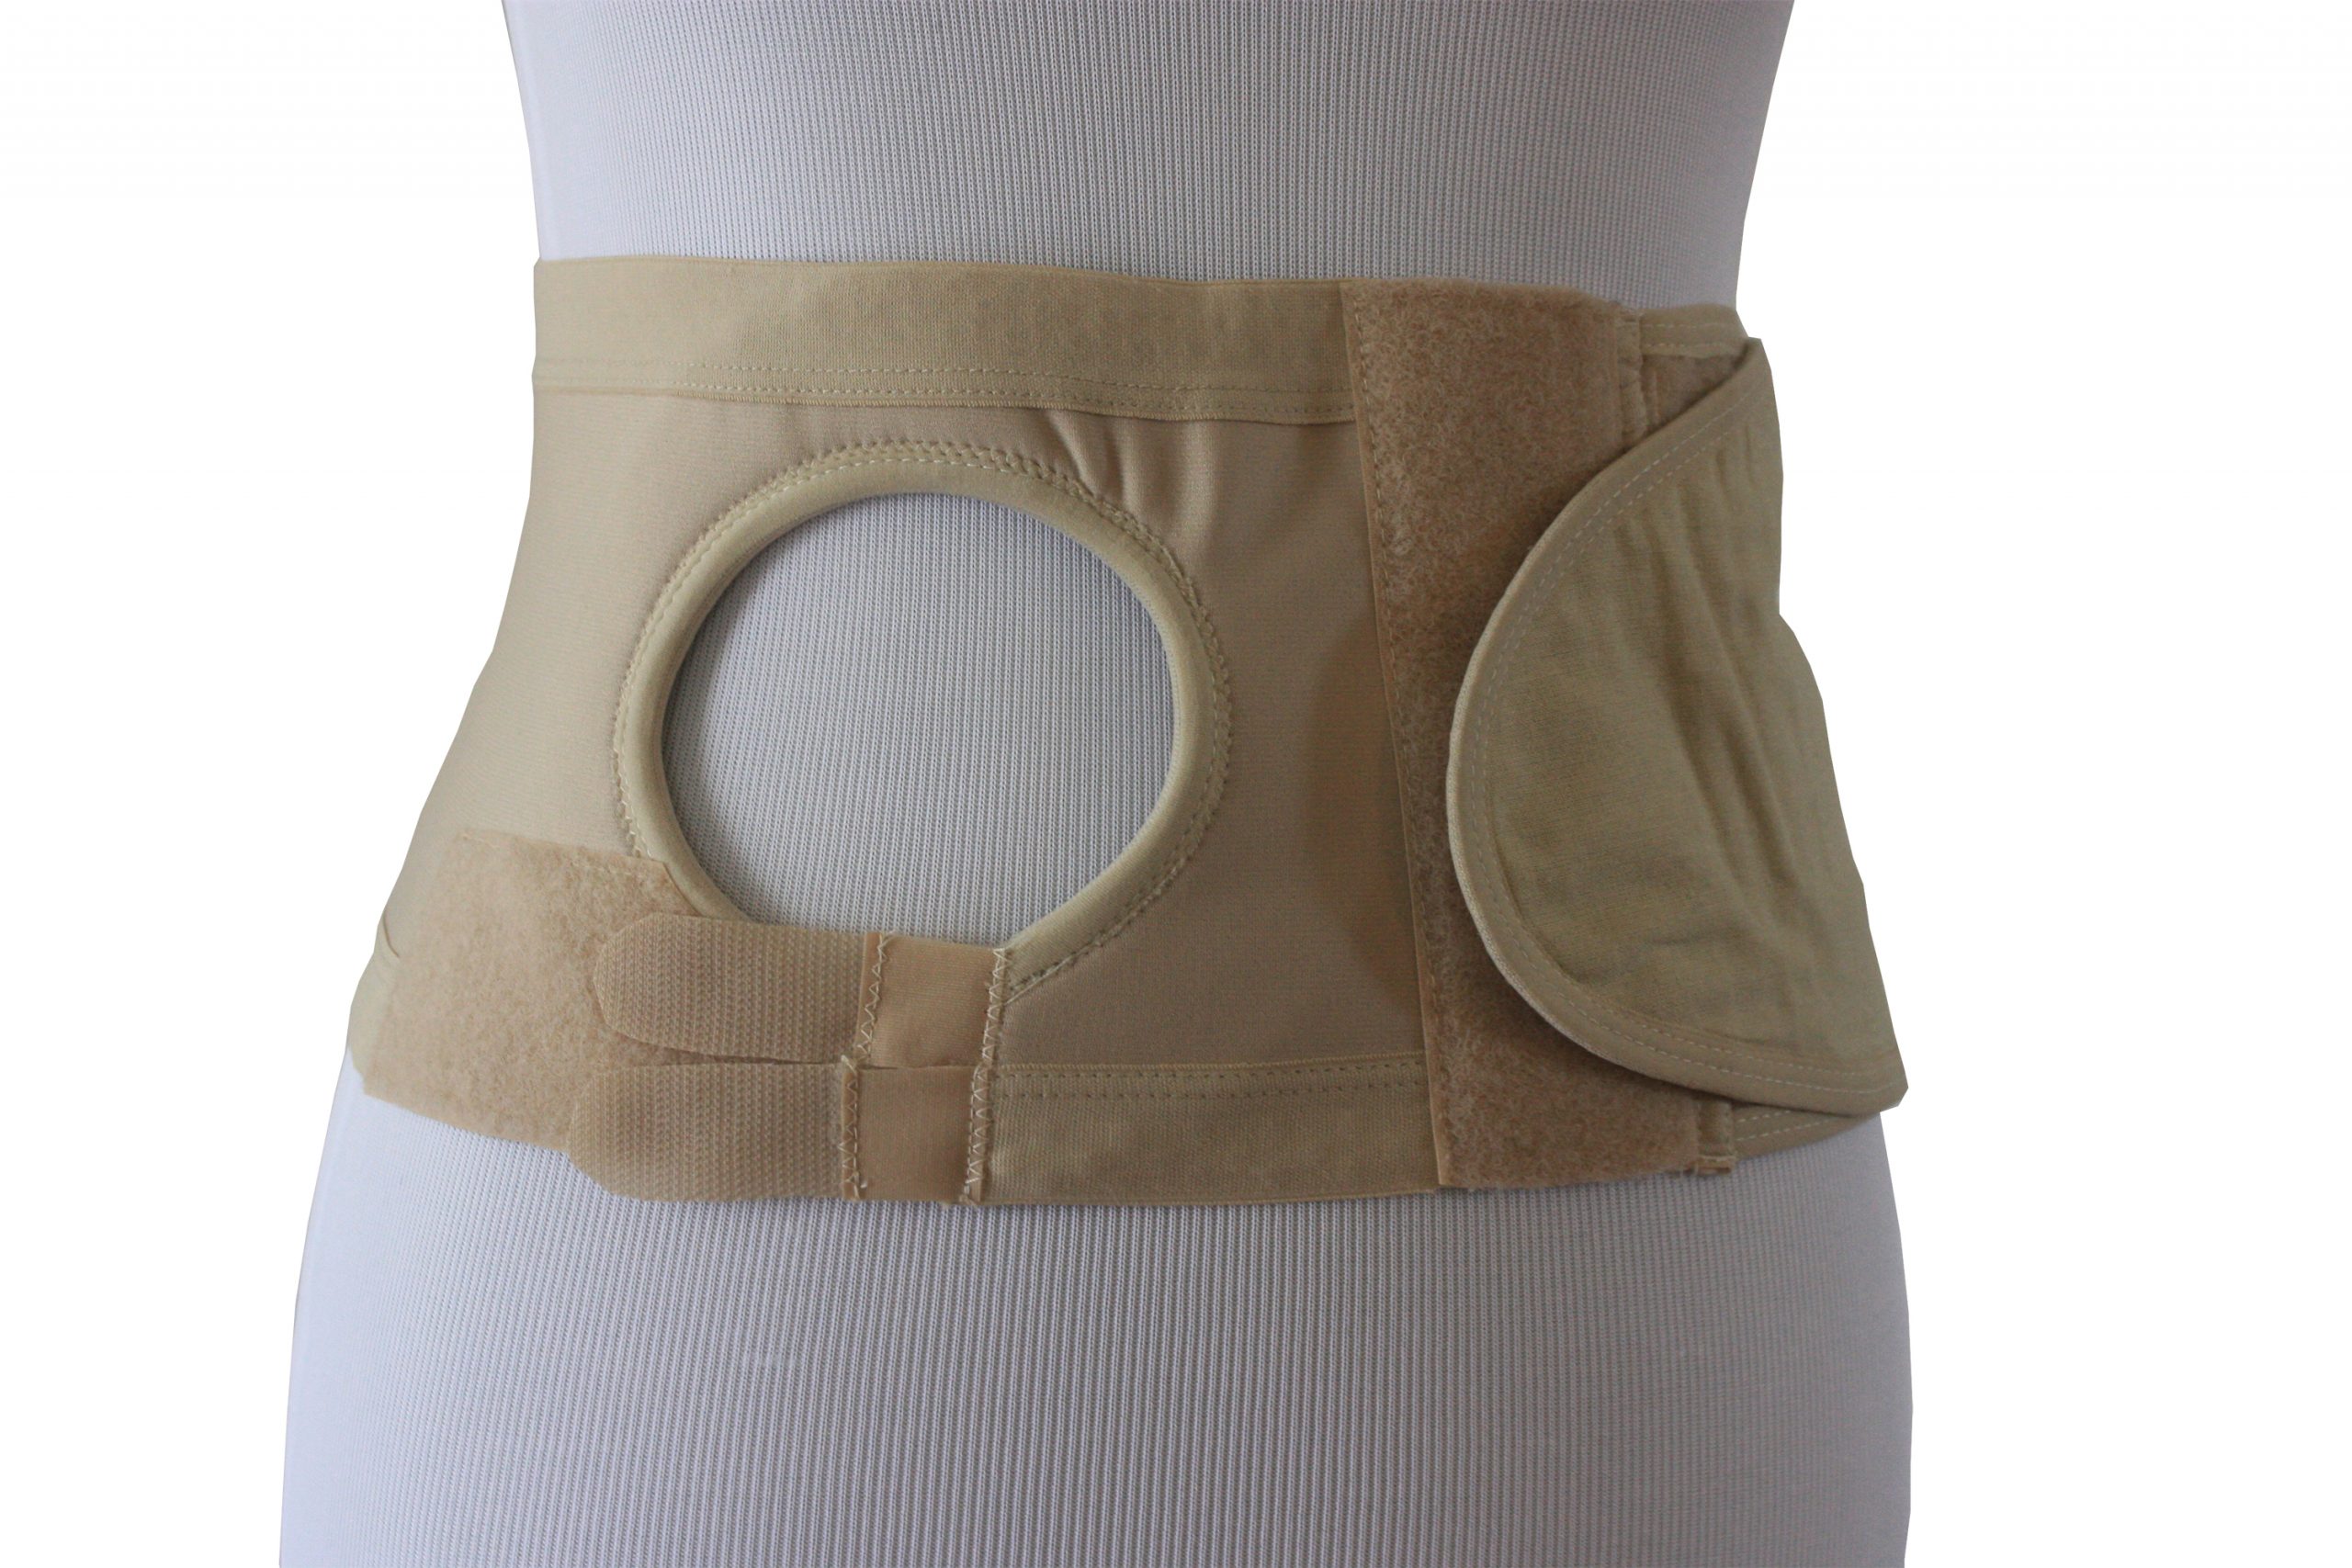 Buy Safe n' Simple Security Ostomy Belt with Pouch Opening at